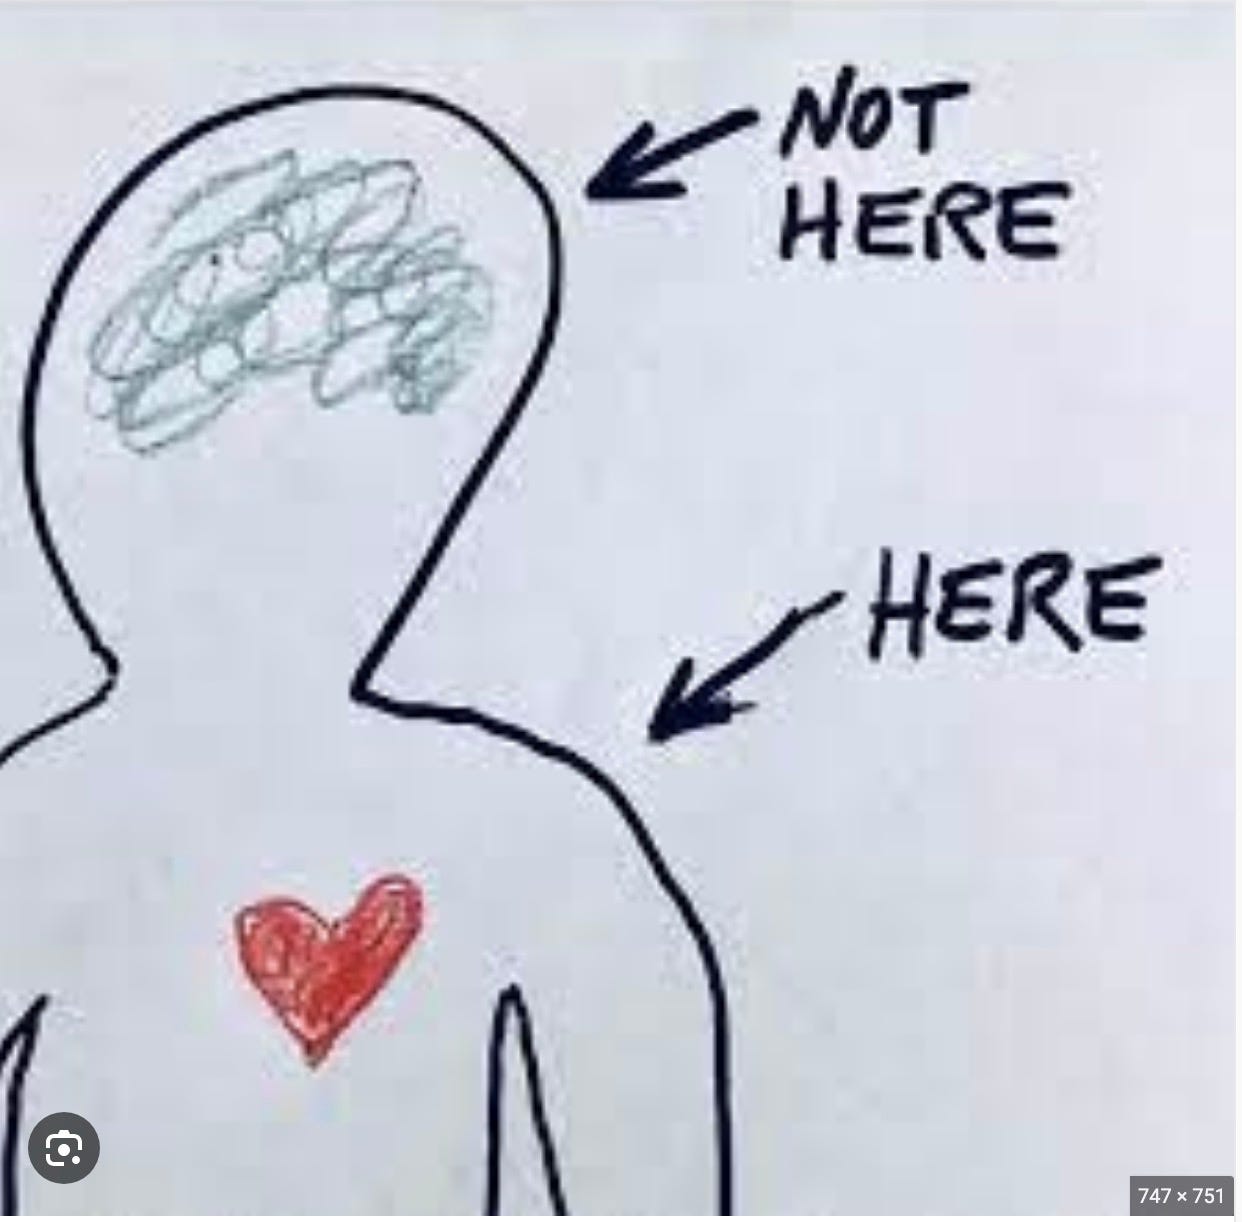 A simple drawing of a human with an arrow pointing to the head that says not here and an arrow pointing to the heart that says here